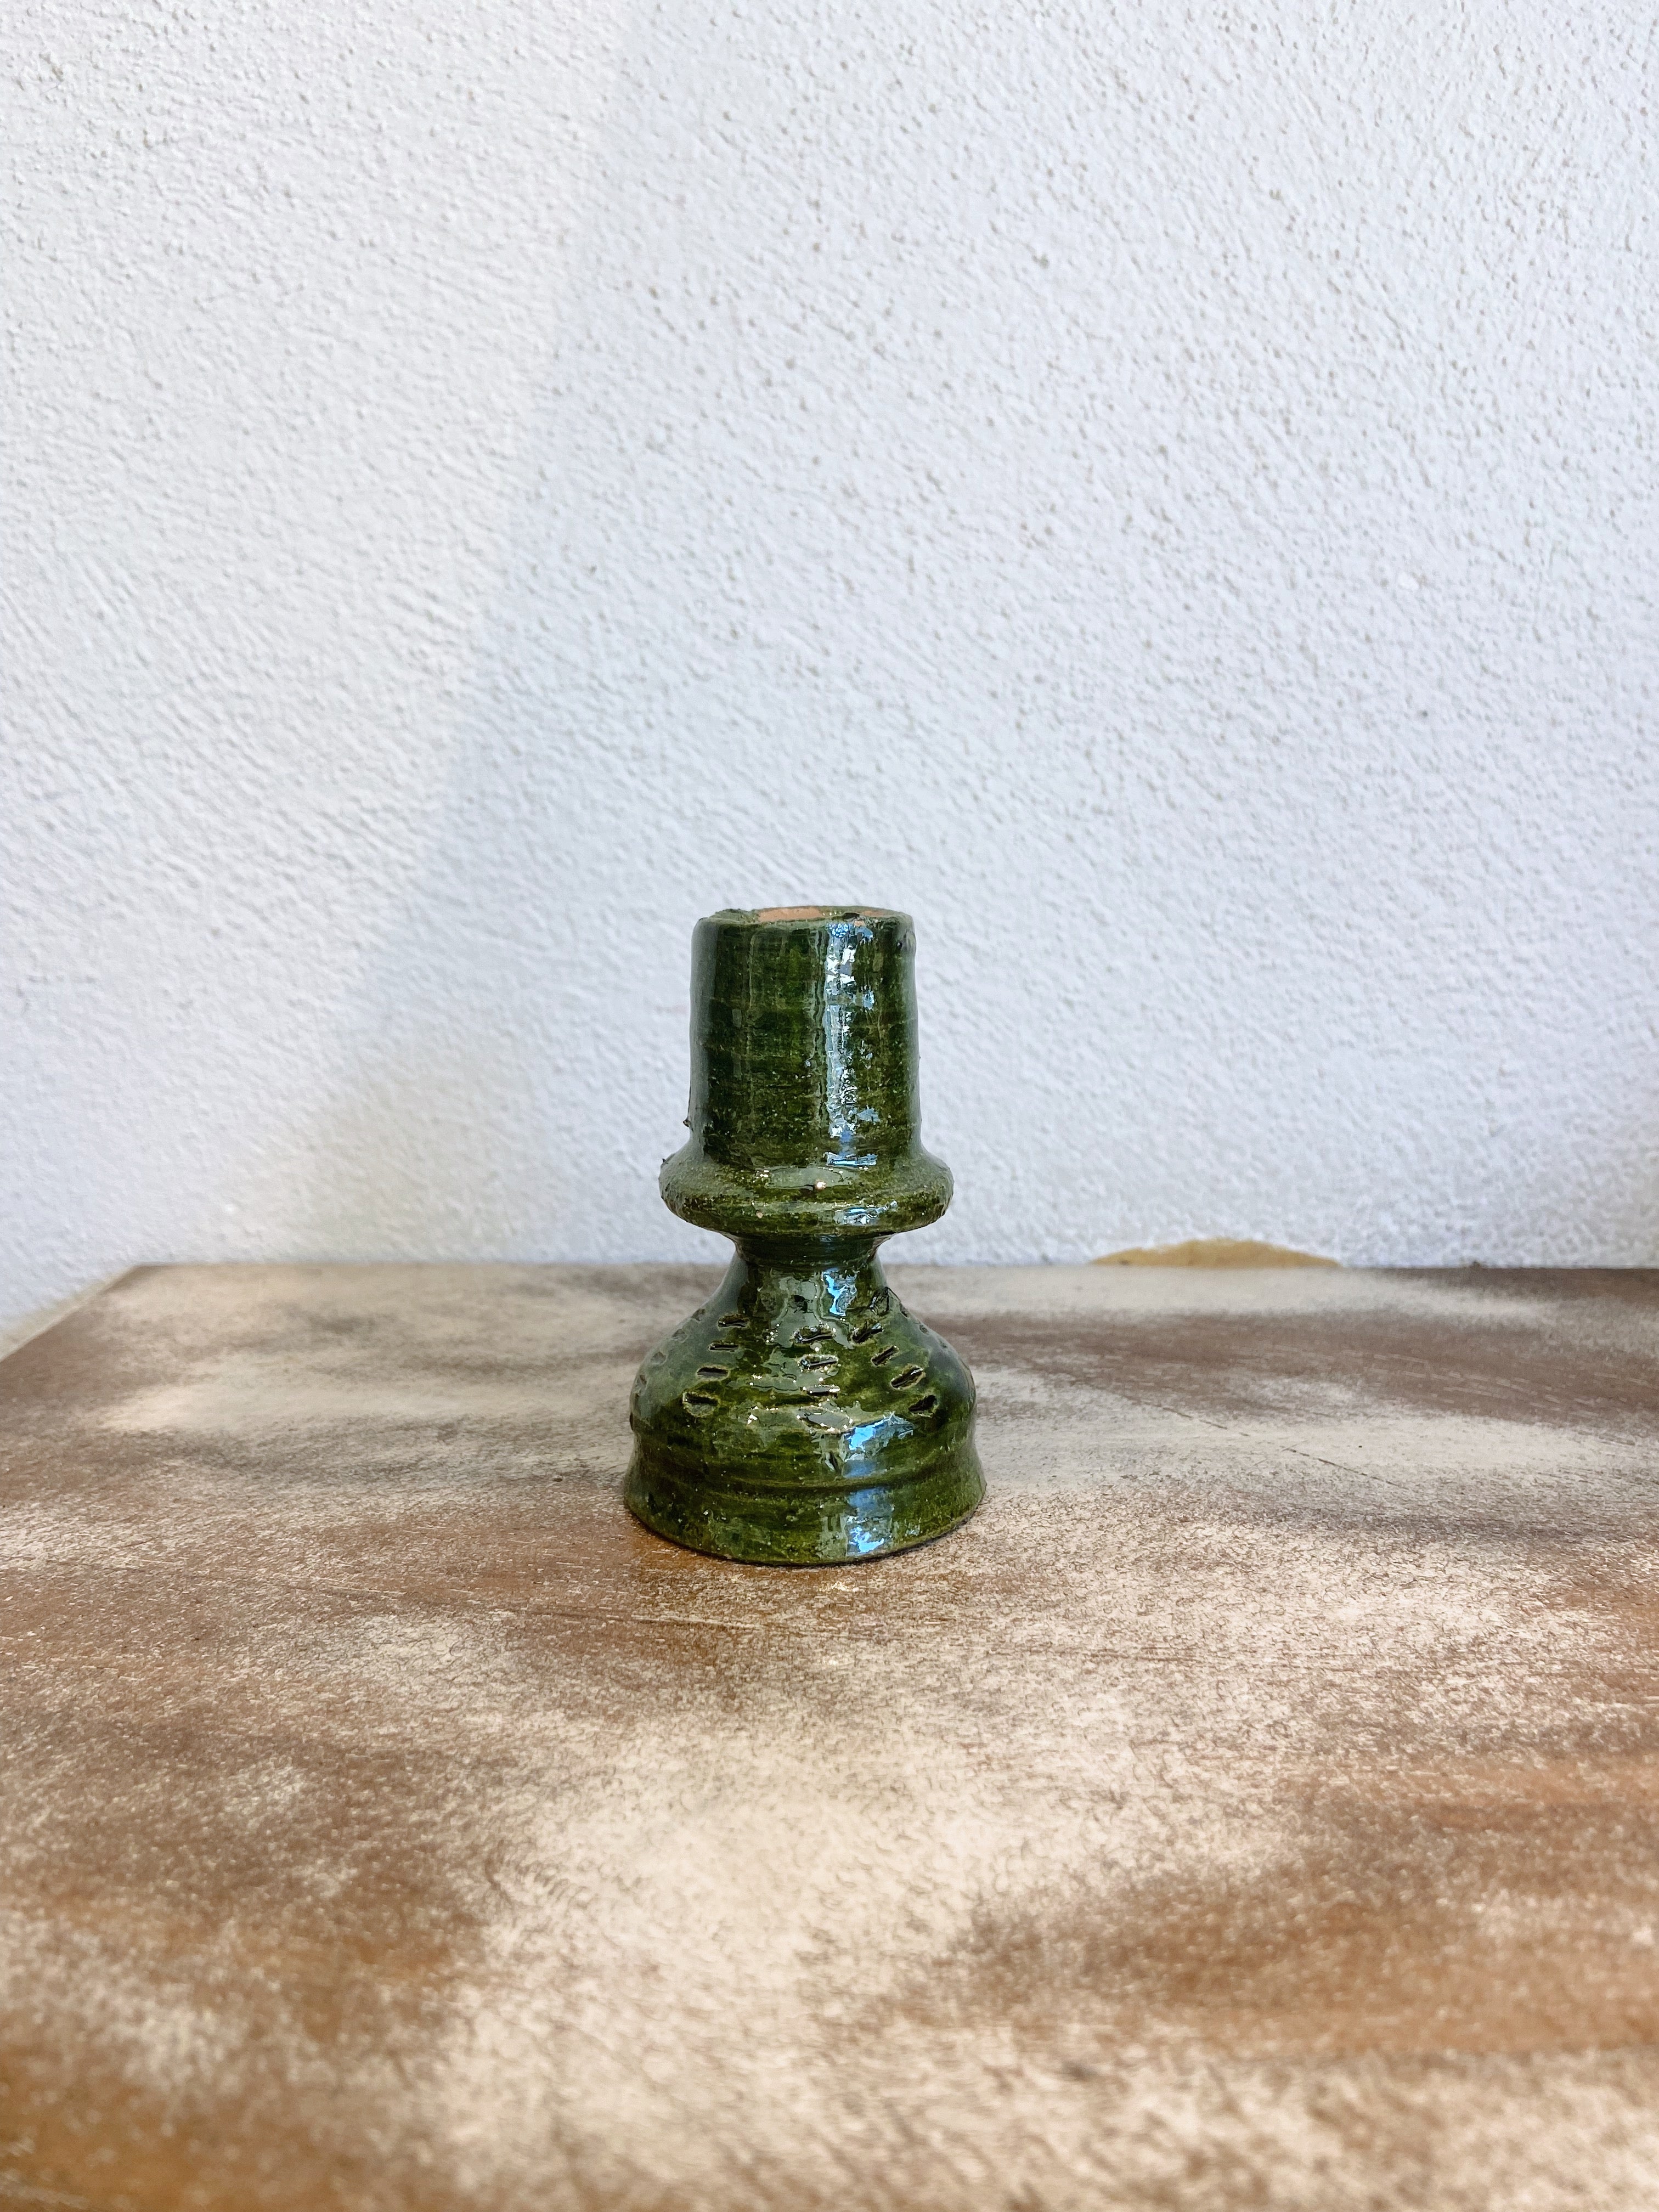 Green glazed traditional candle holders made in Oaxaca